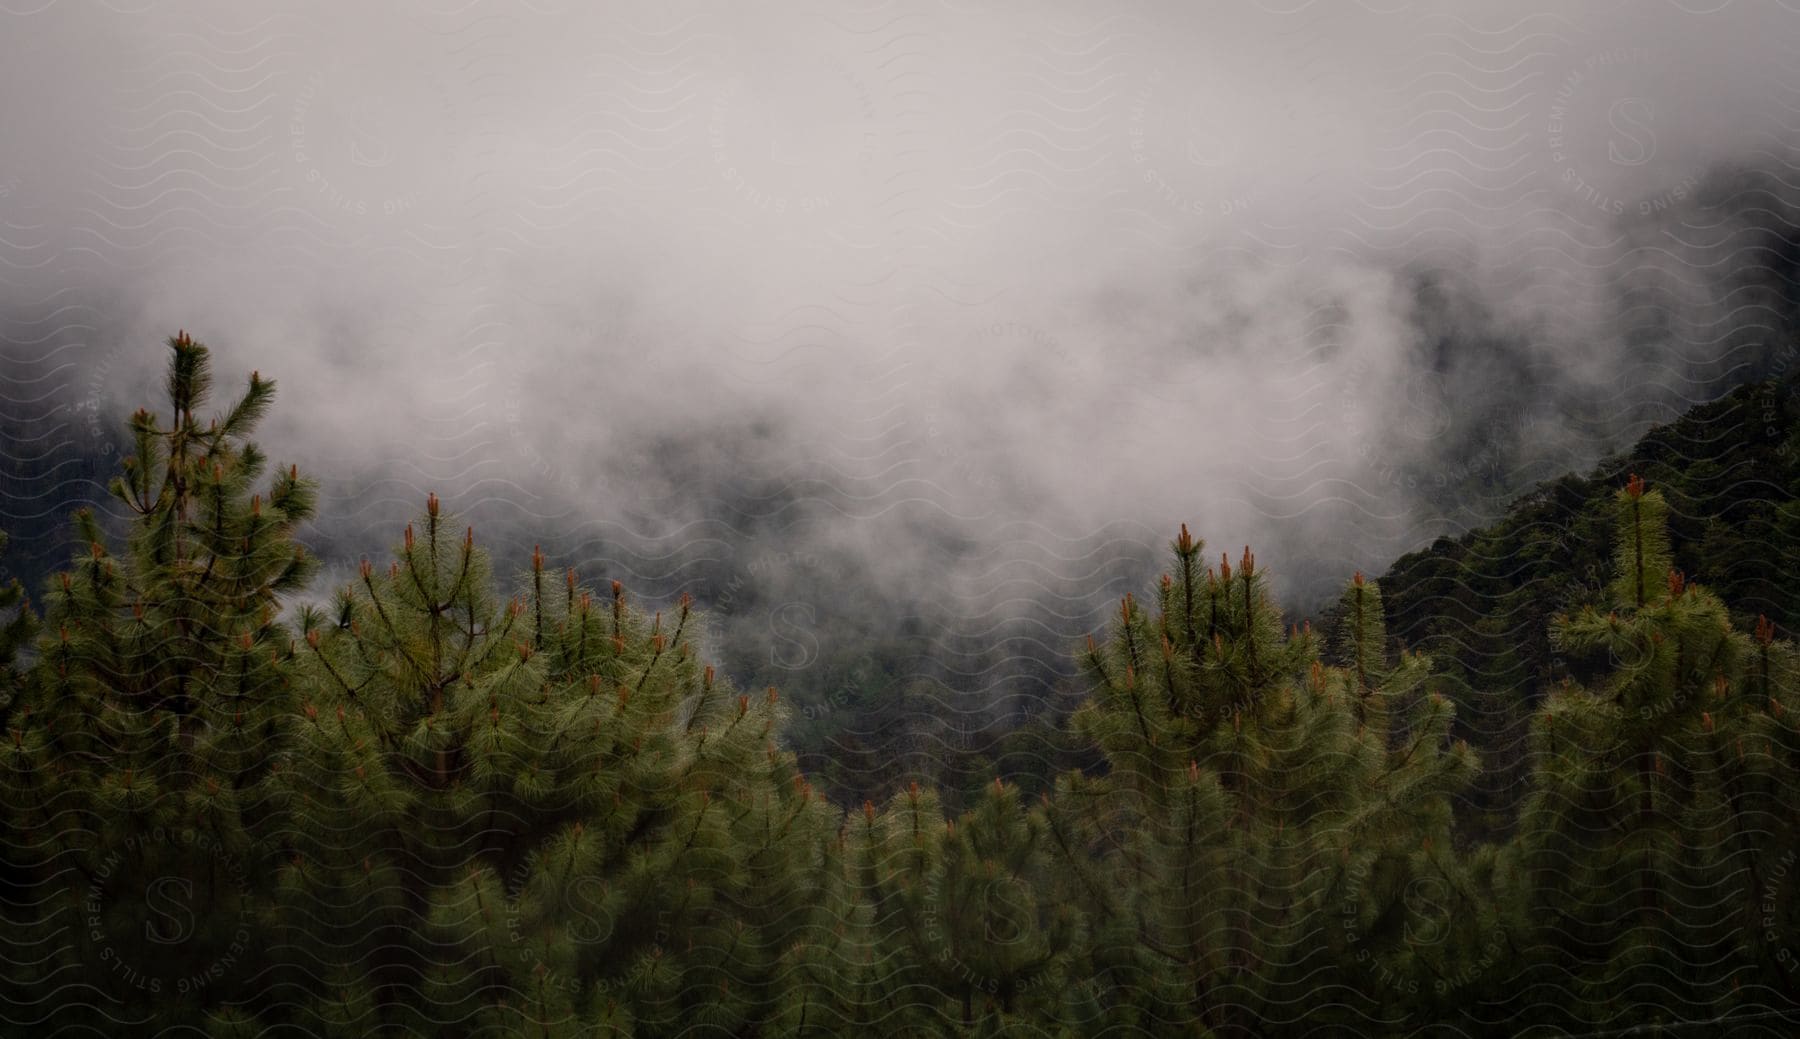 Thick fog covers forested mountains